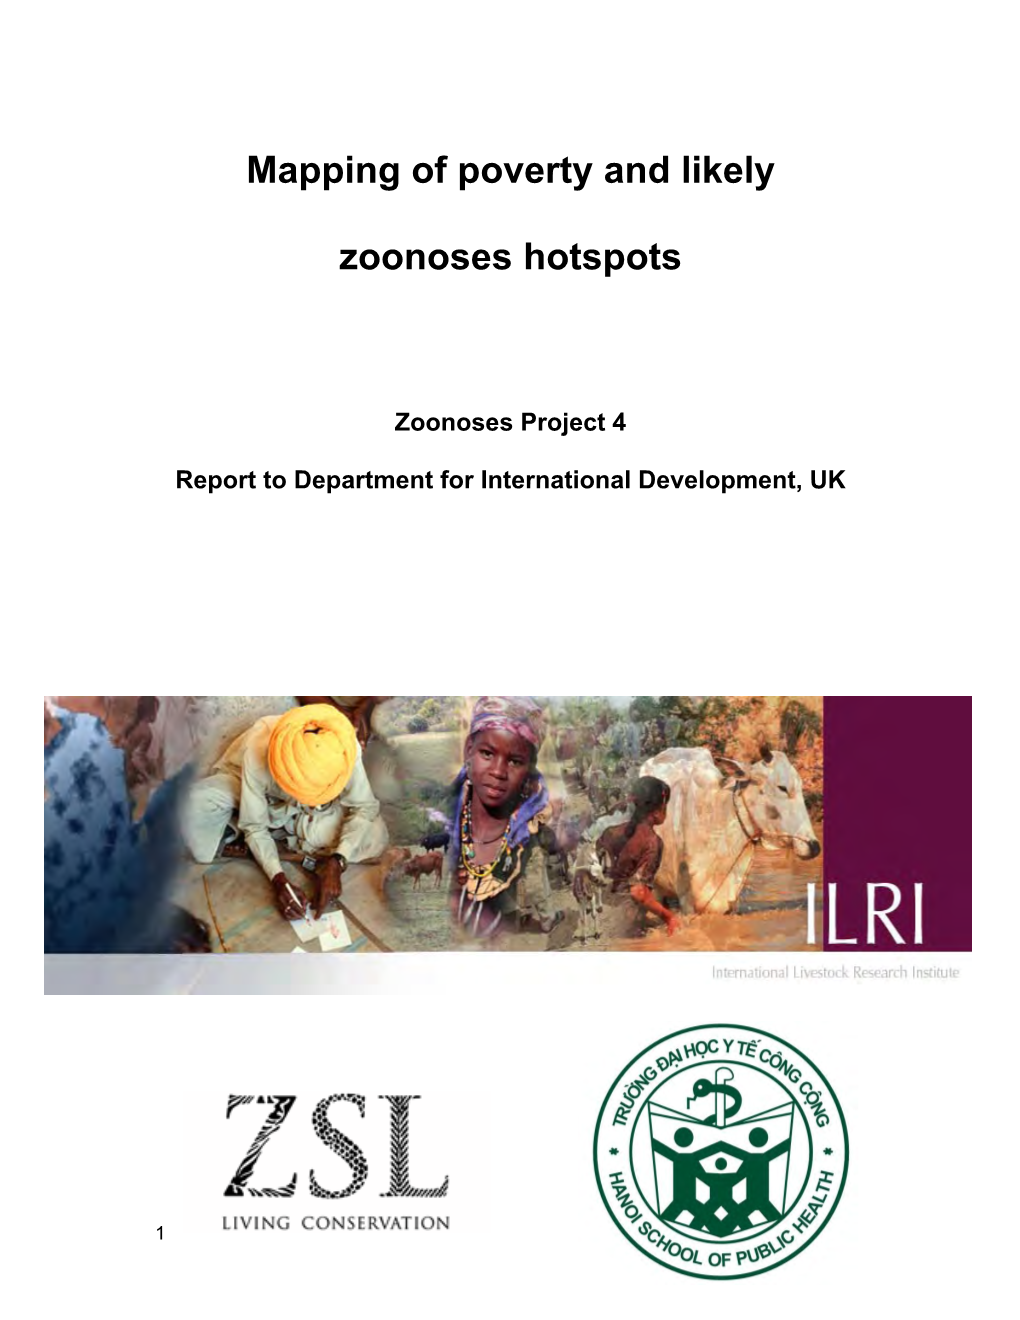 Mapping of Poverty and Likely Zoonoses Hotspots